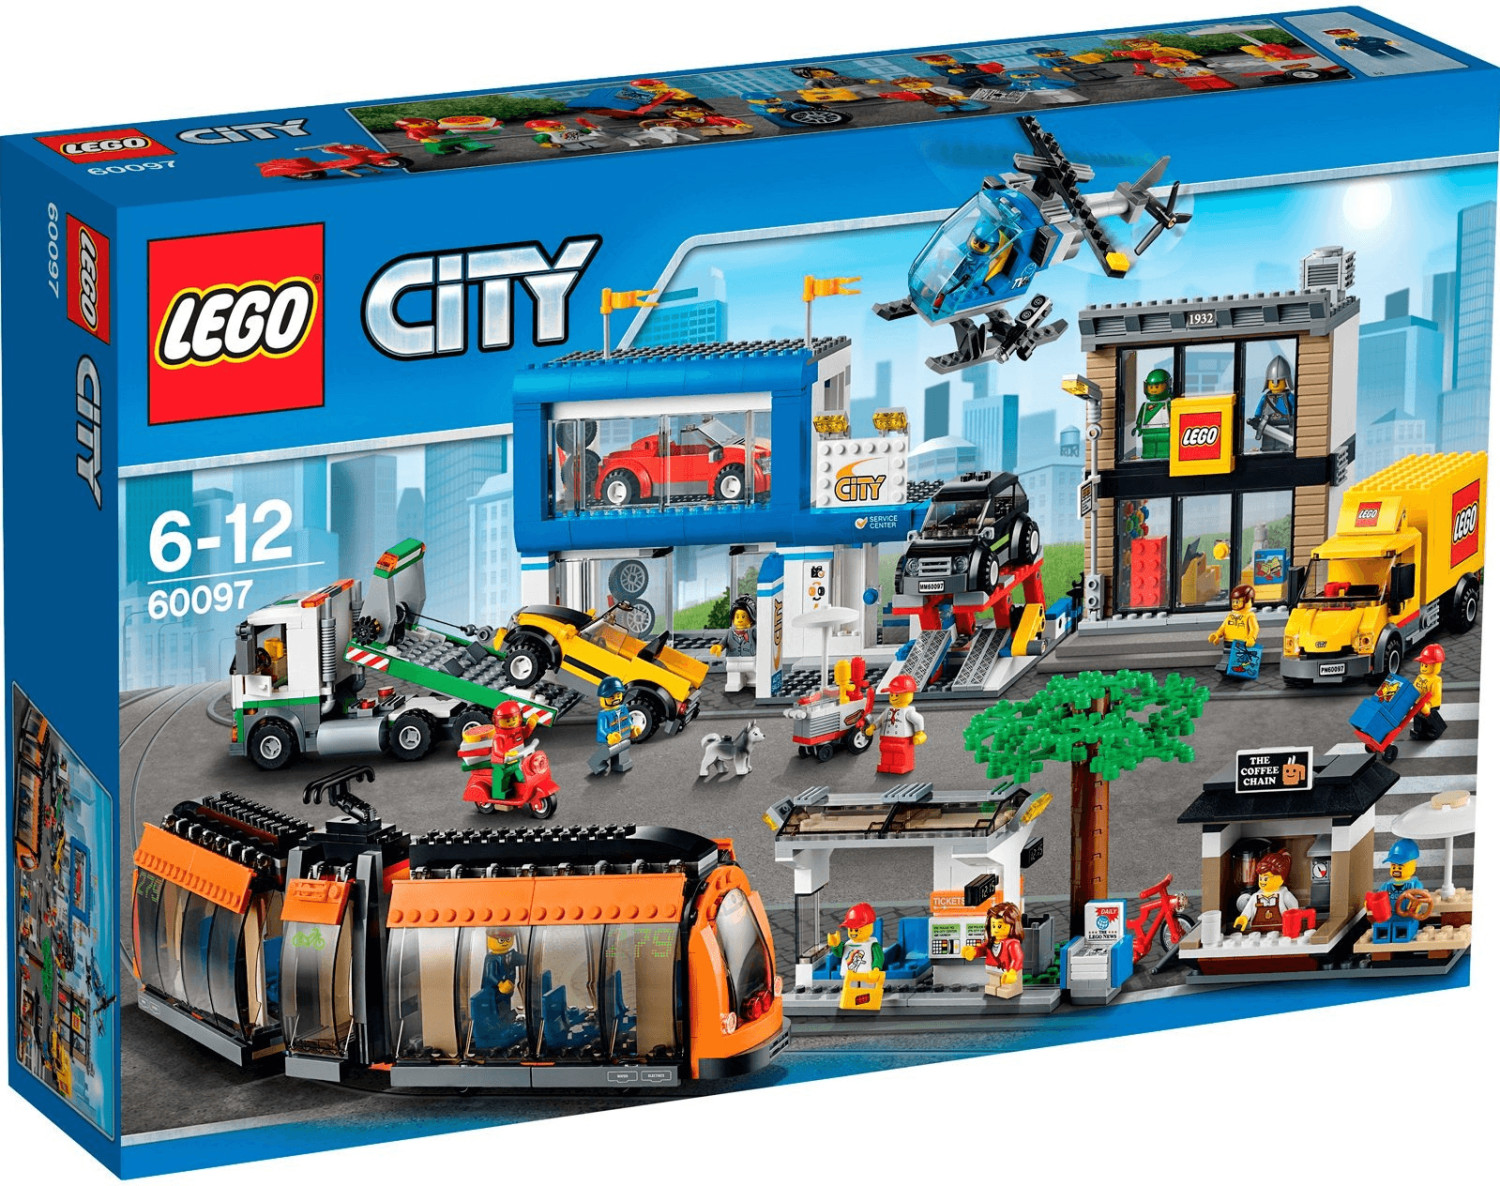 buy-lego-city-city-square-60097-from-264-00-today-best-deals-on